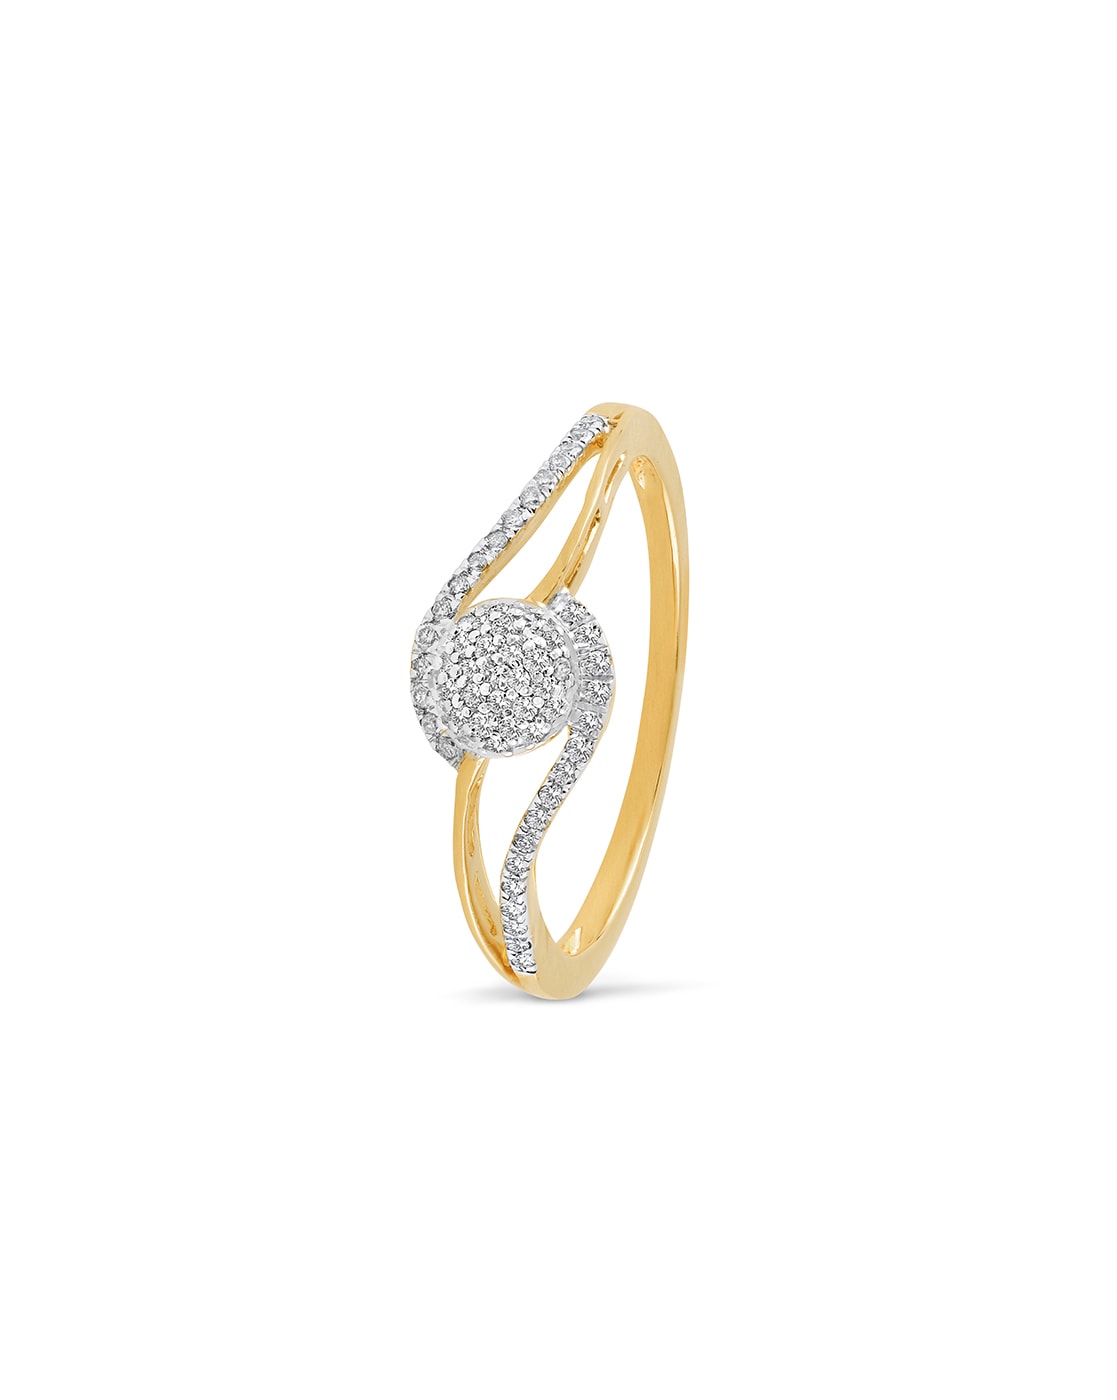 Buy Reliance Jewels 14 KT Gold Ring 2.13 g Online at Best Prices in India -  JioMart.